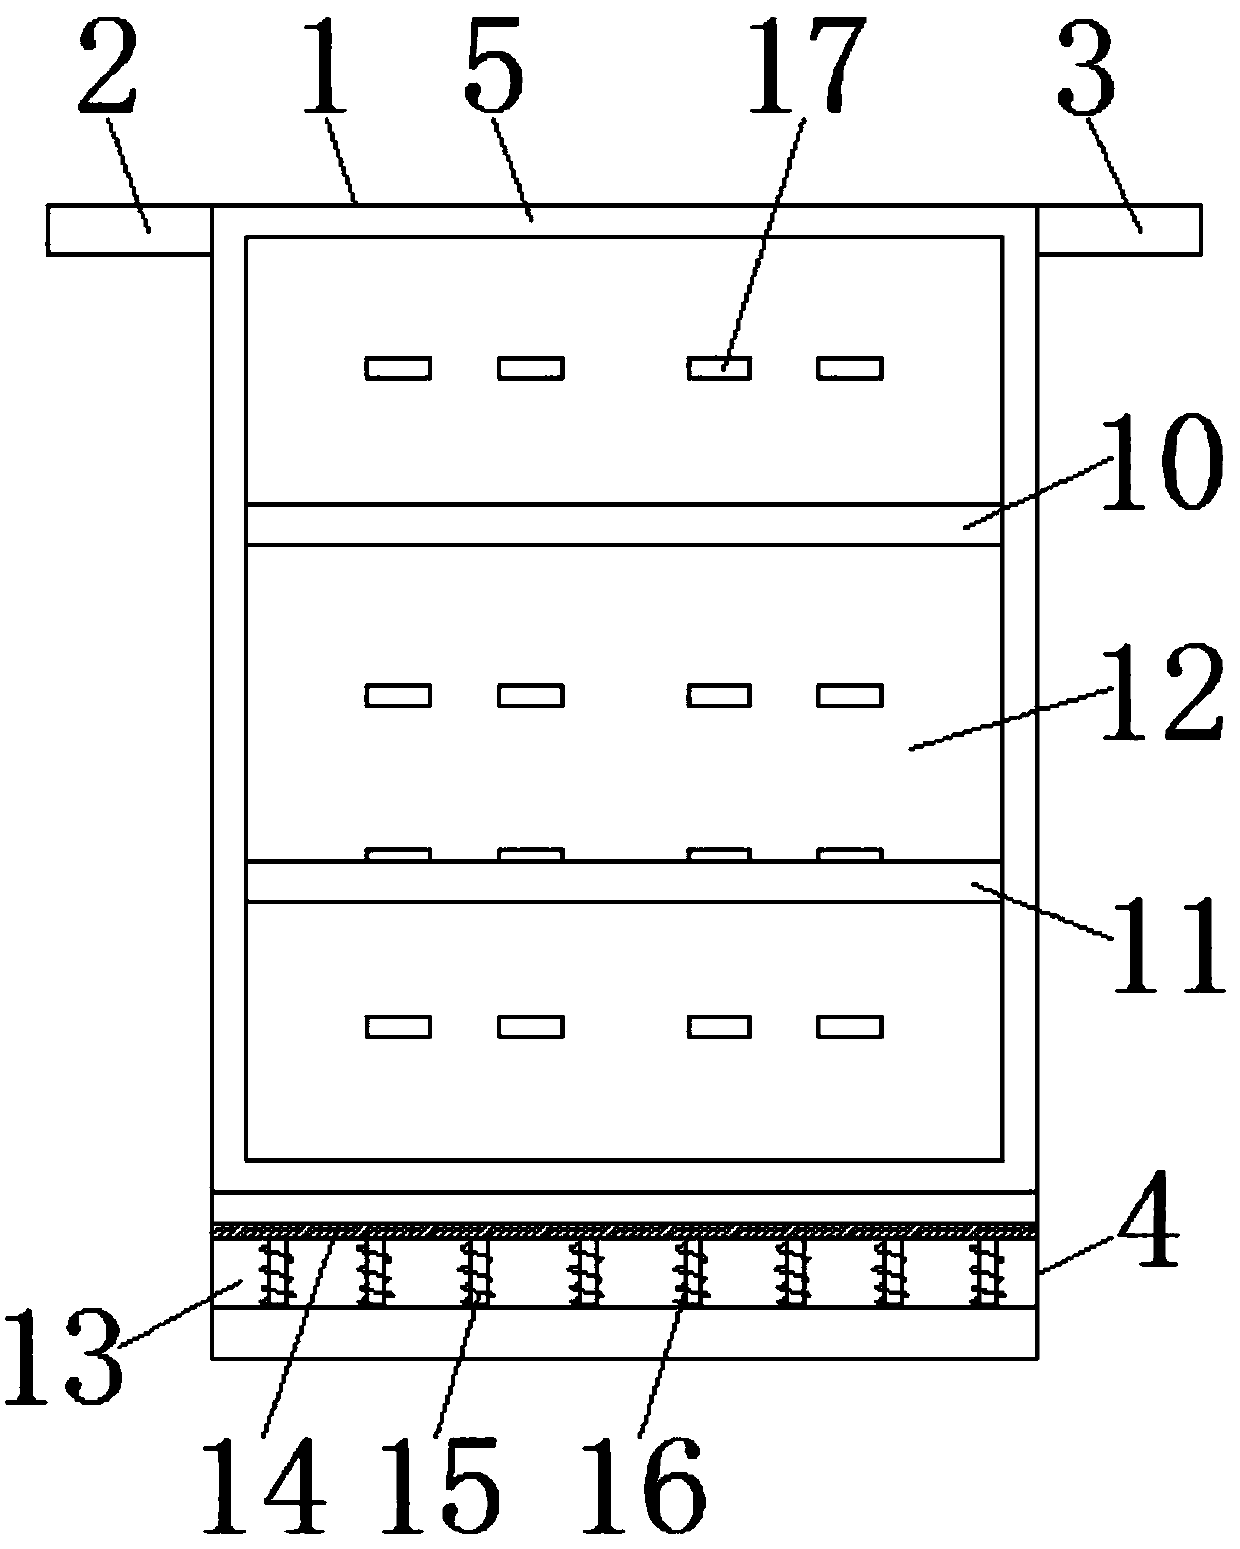 Novel low-voltage switch cabinet capable of shock prevention and cooling